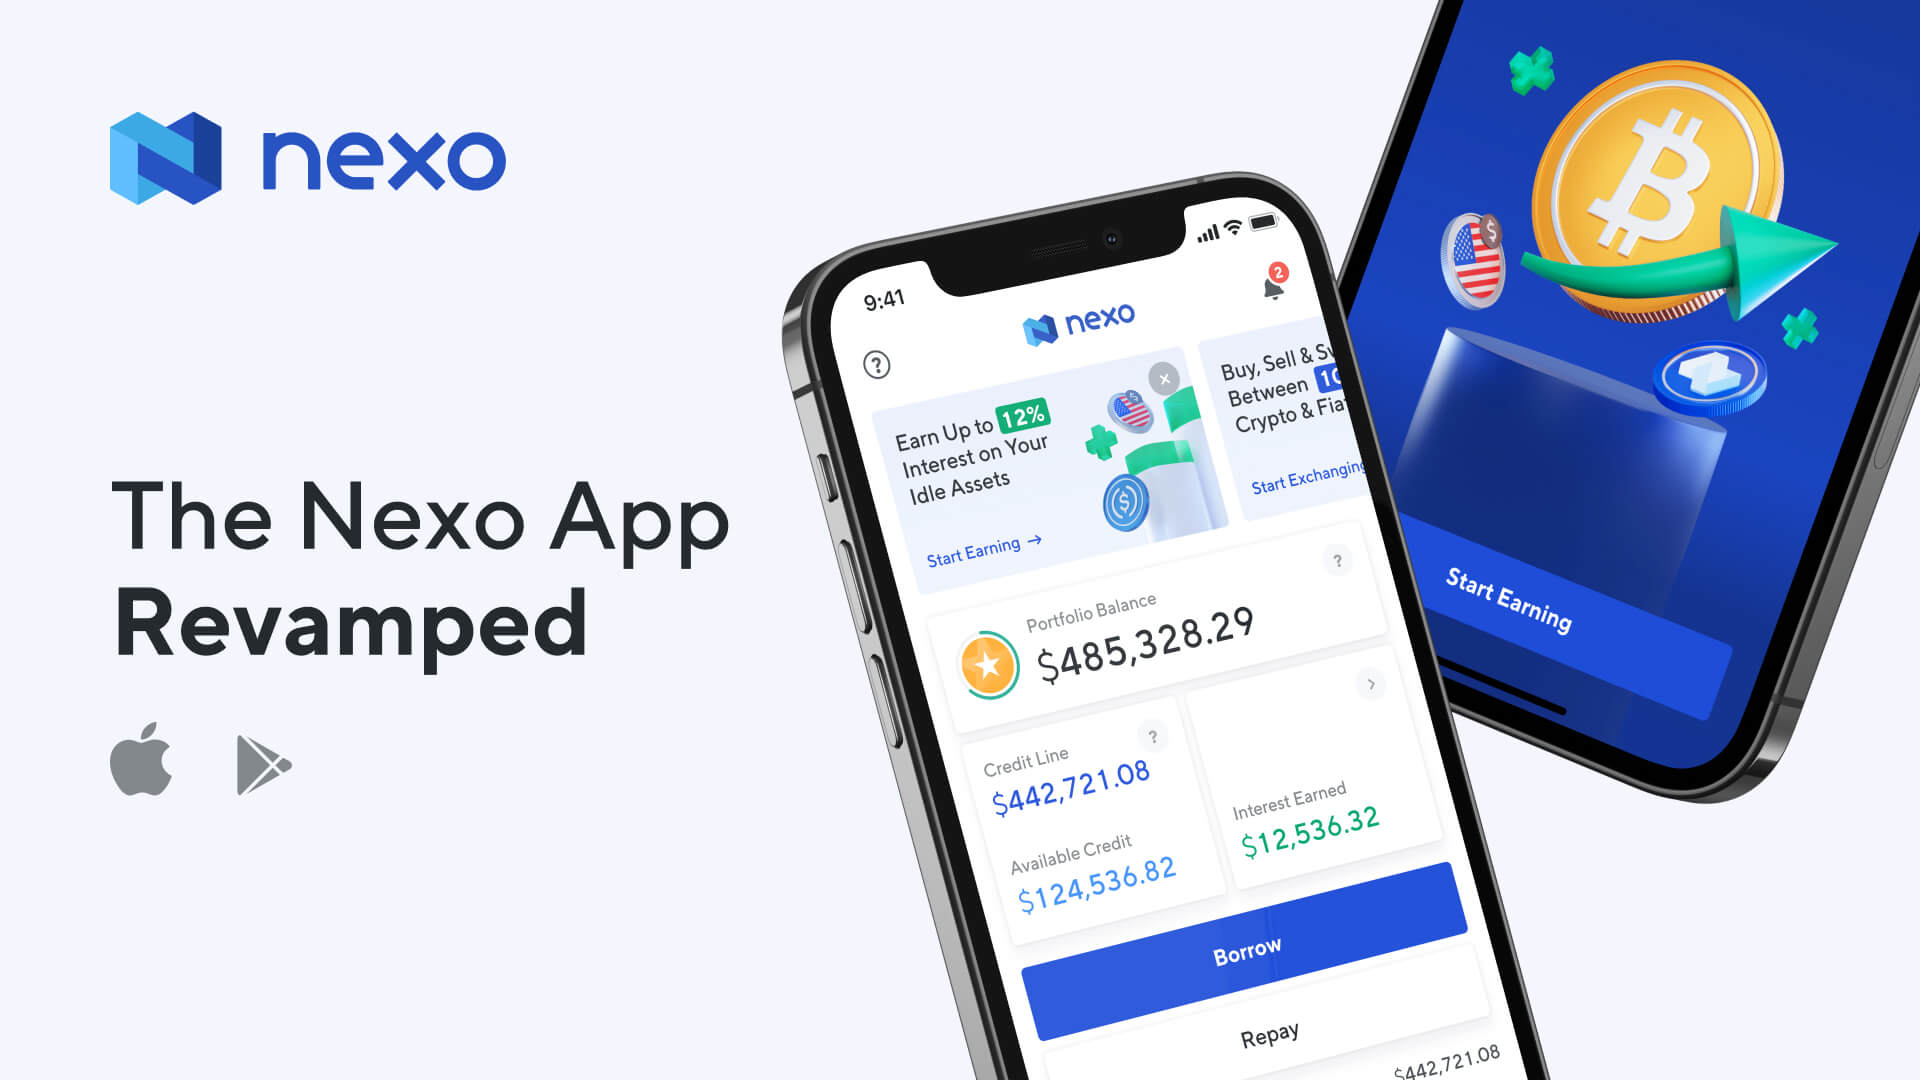 New Look, New Features – It’s the Nexo App 2.0